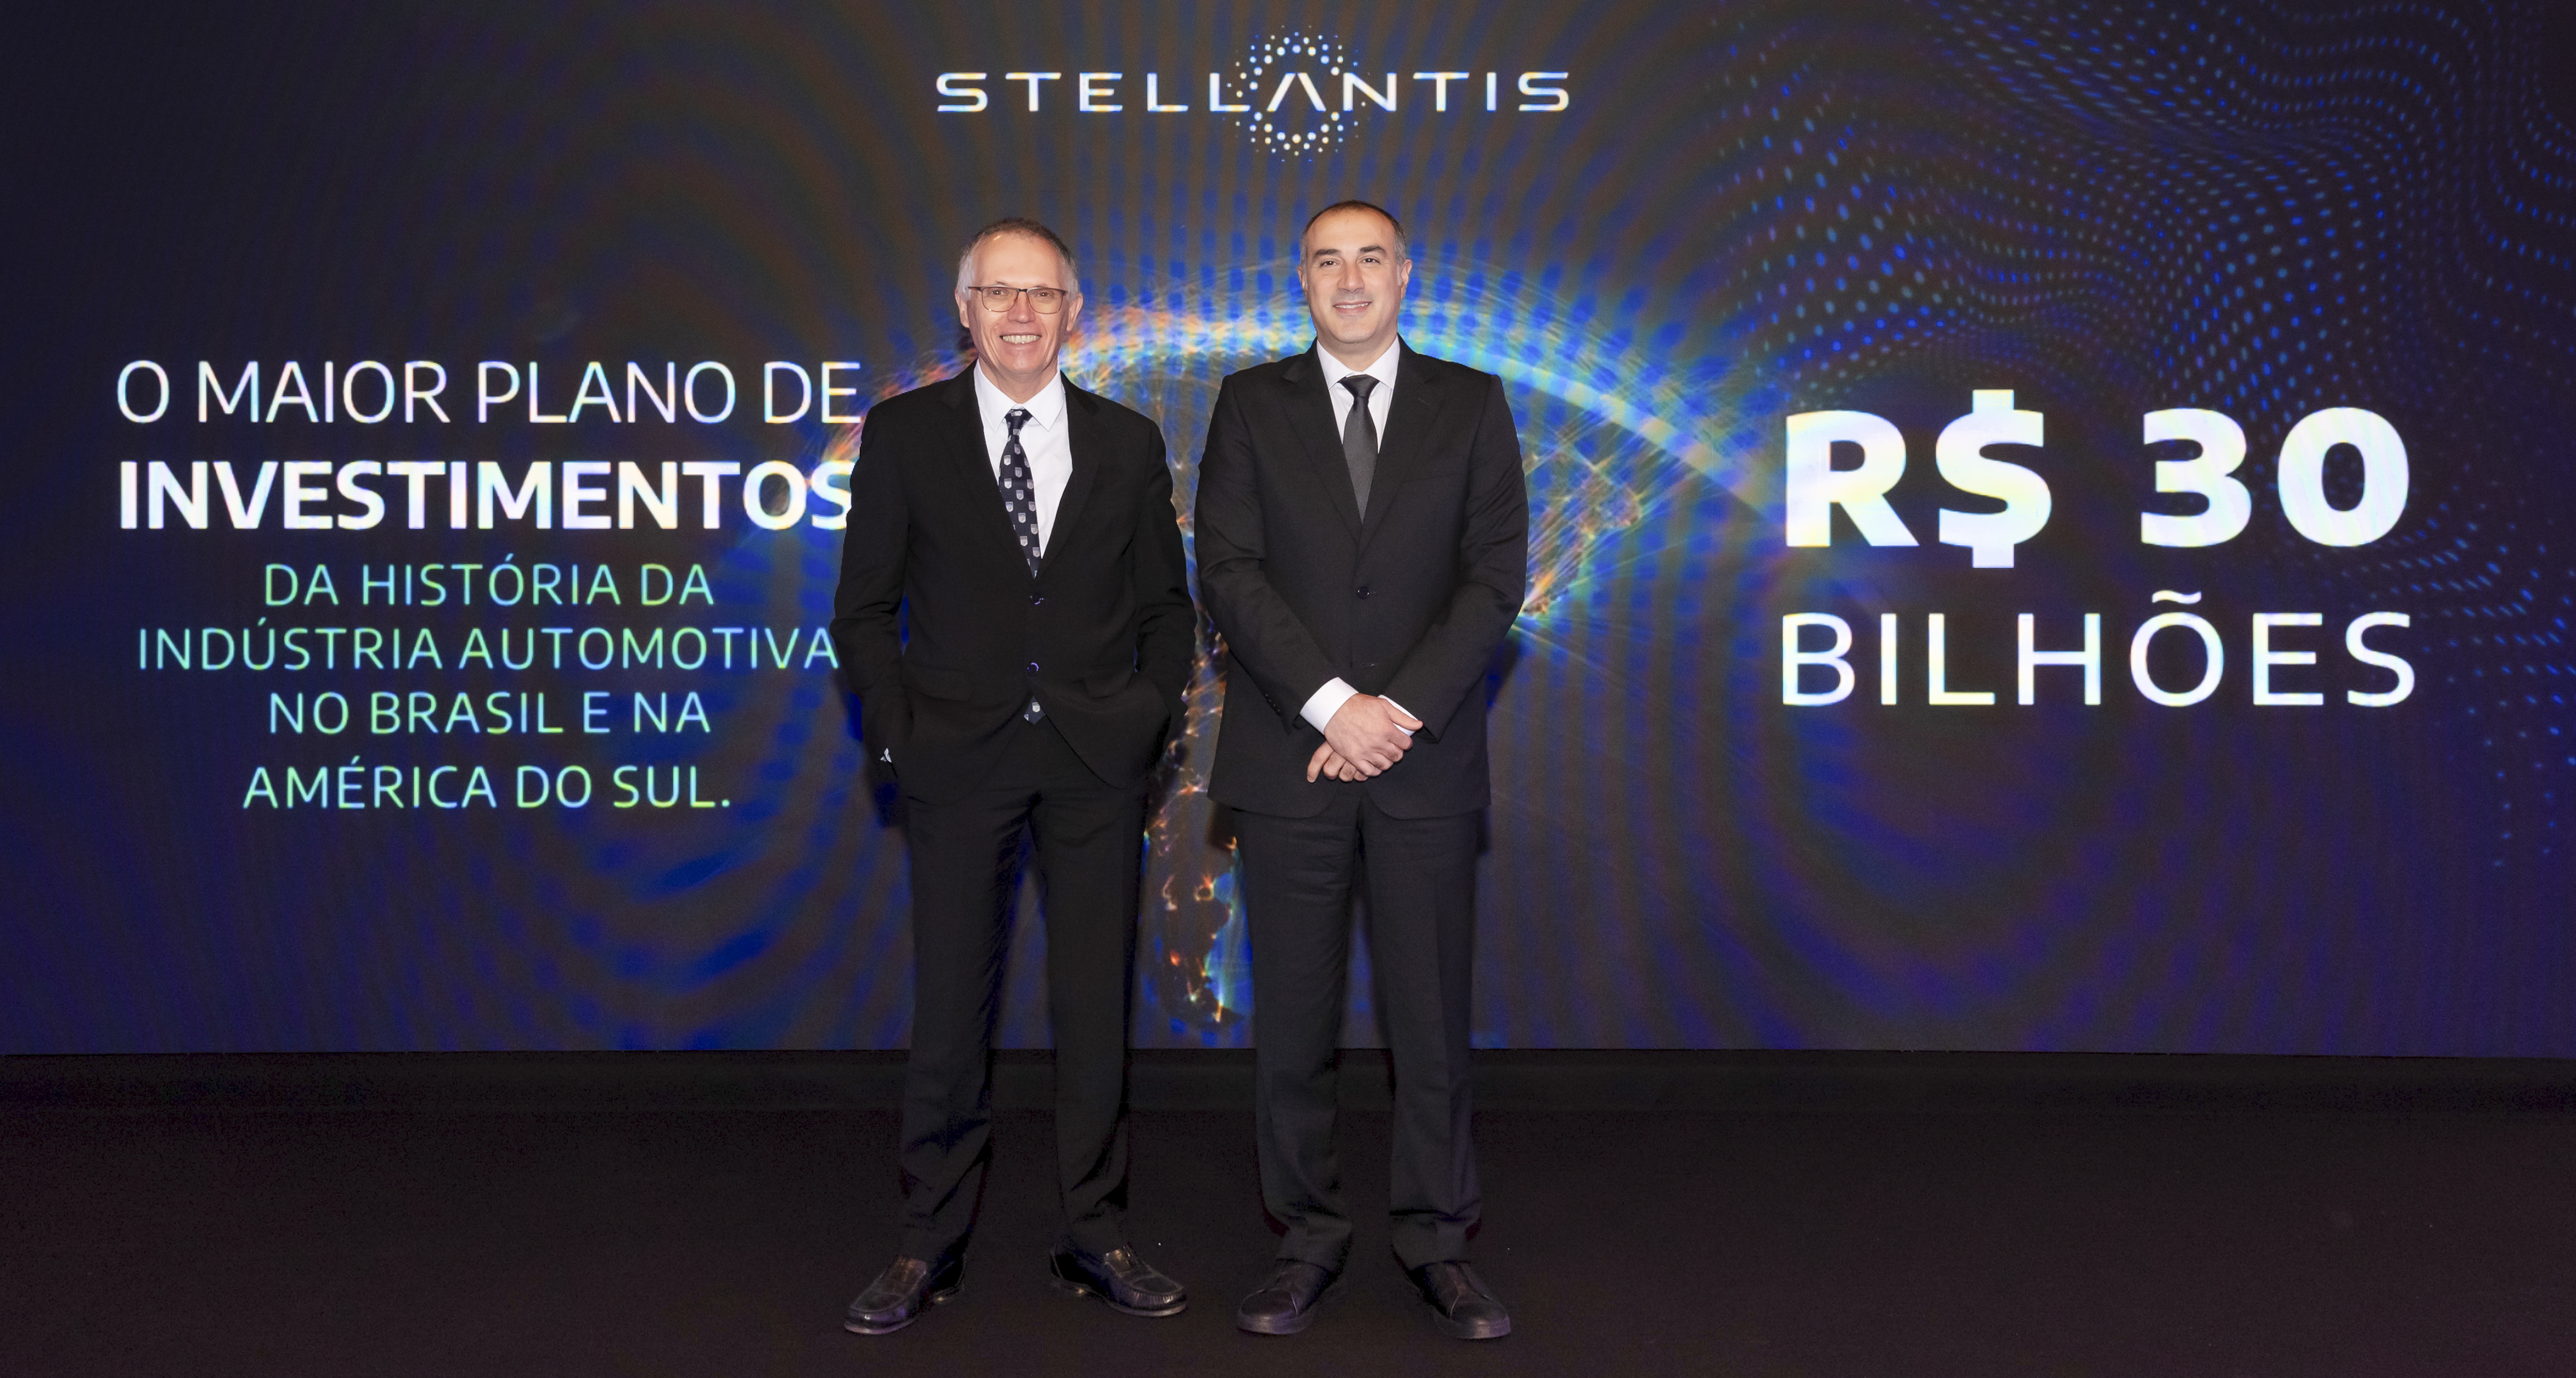 Image of CEO Carlos Tavares and COO Emanuele Cappellano